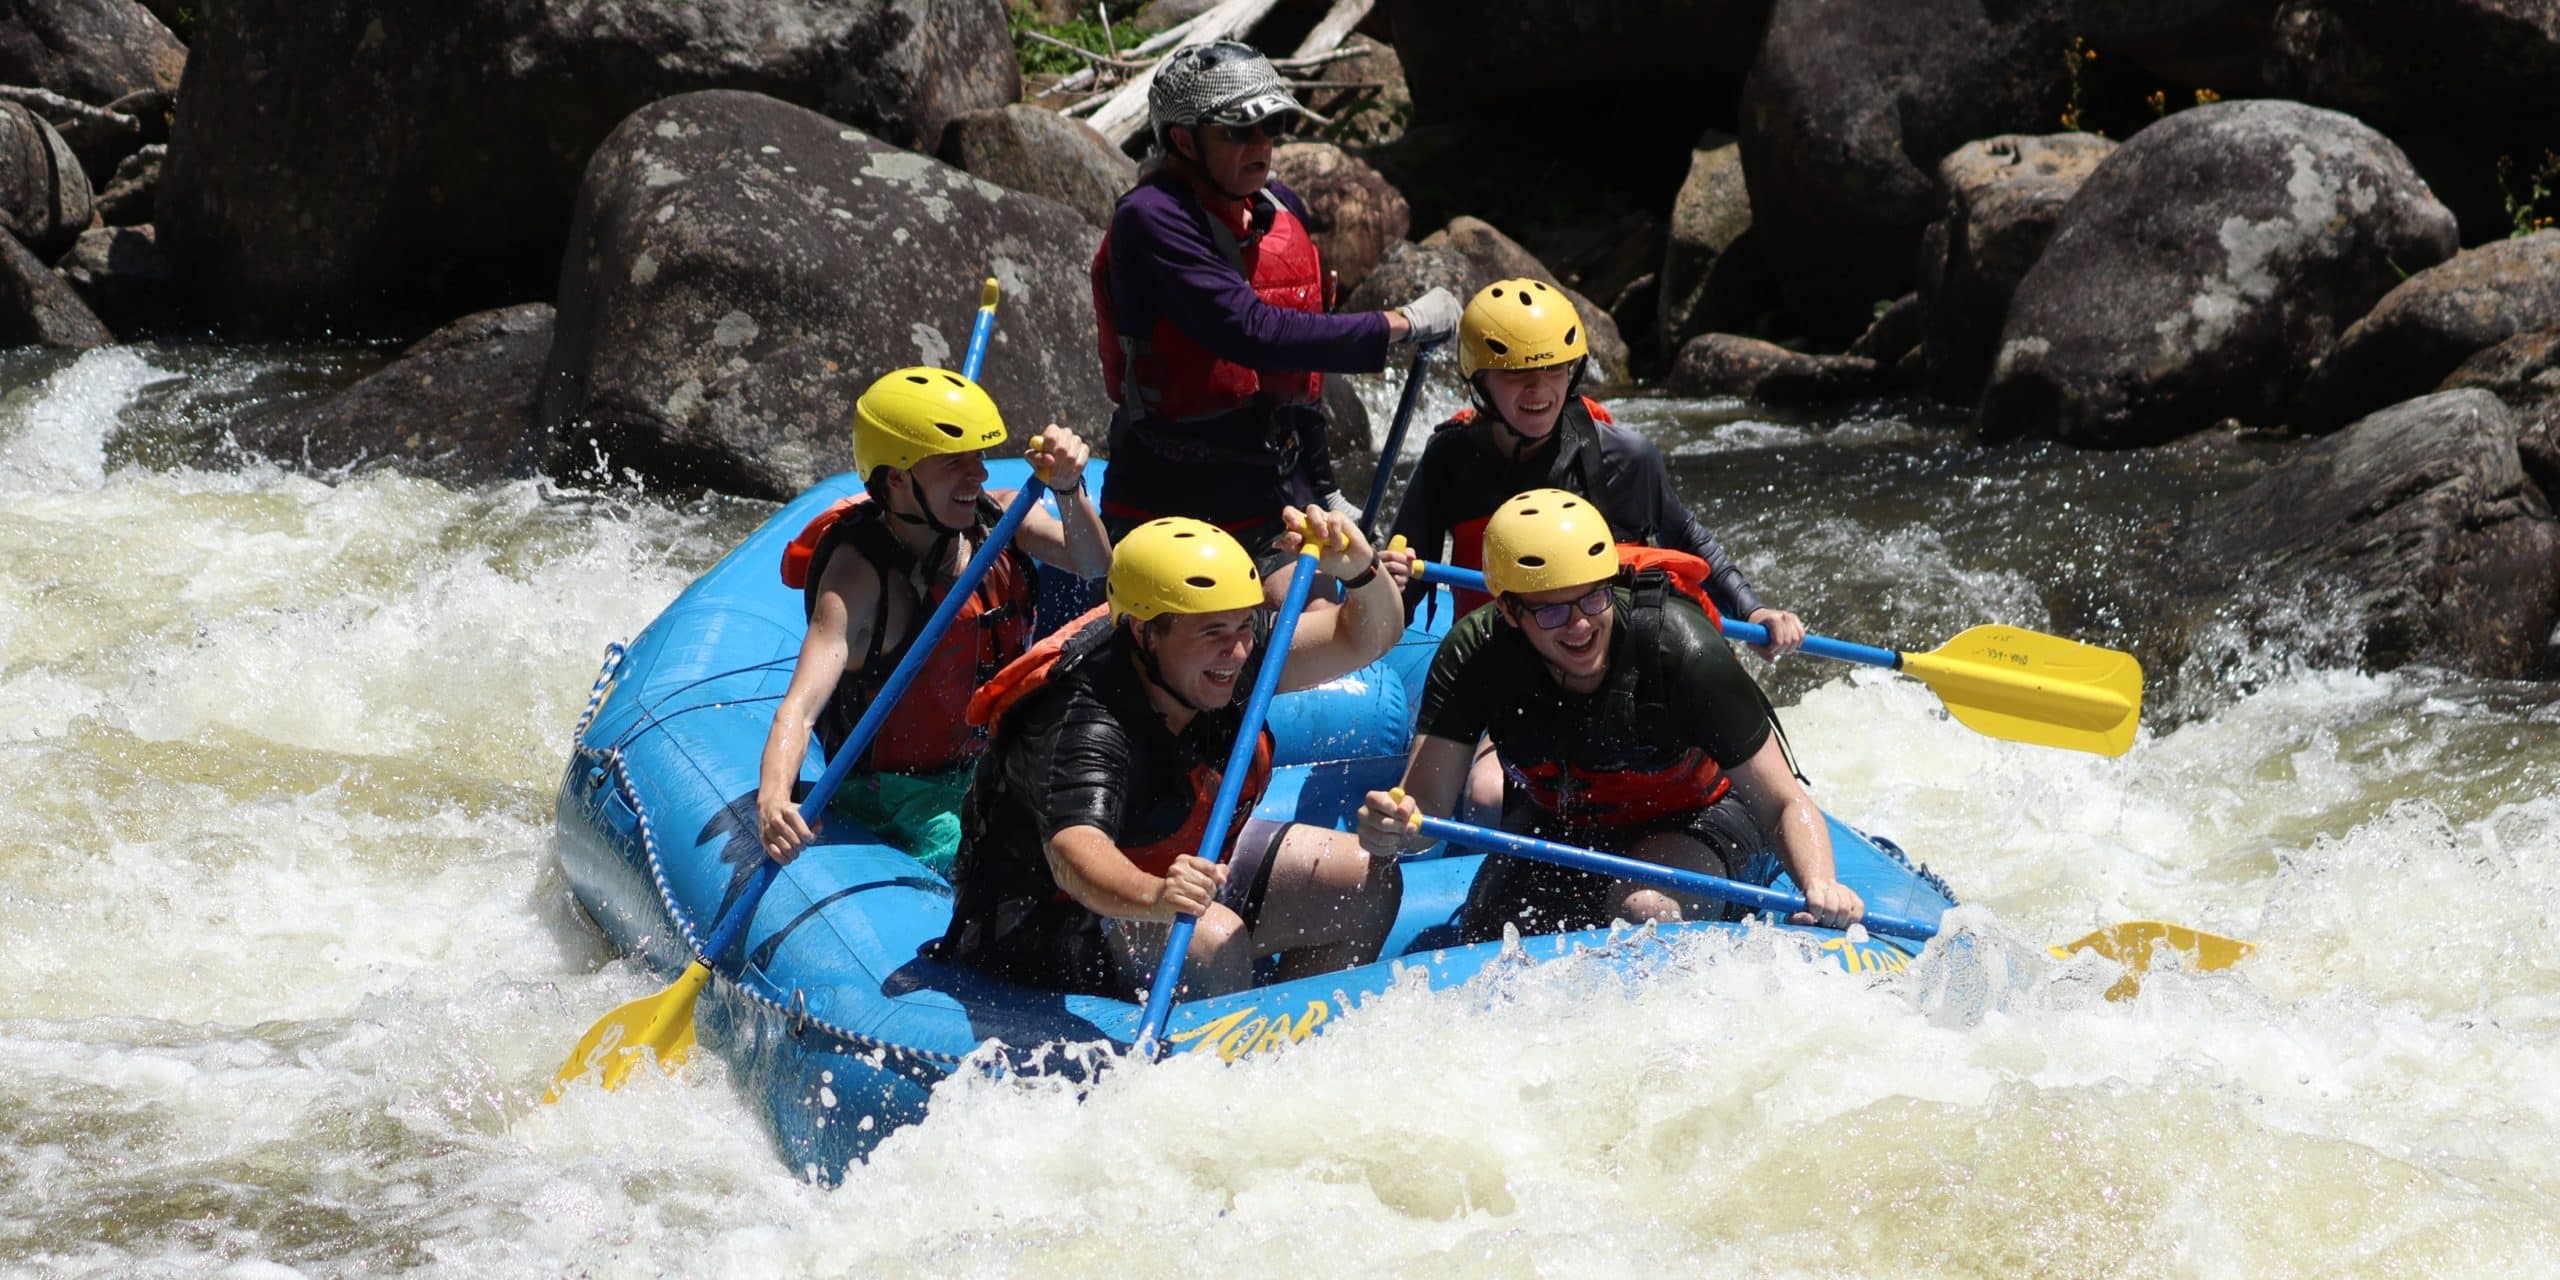 church group rafting on the river through rapids